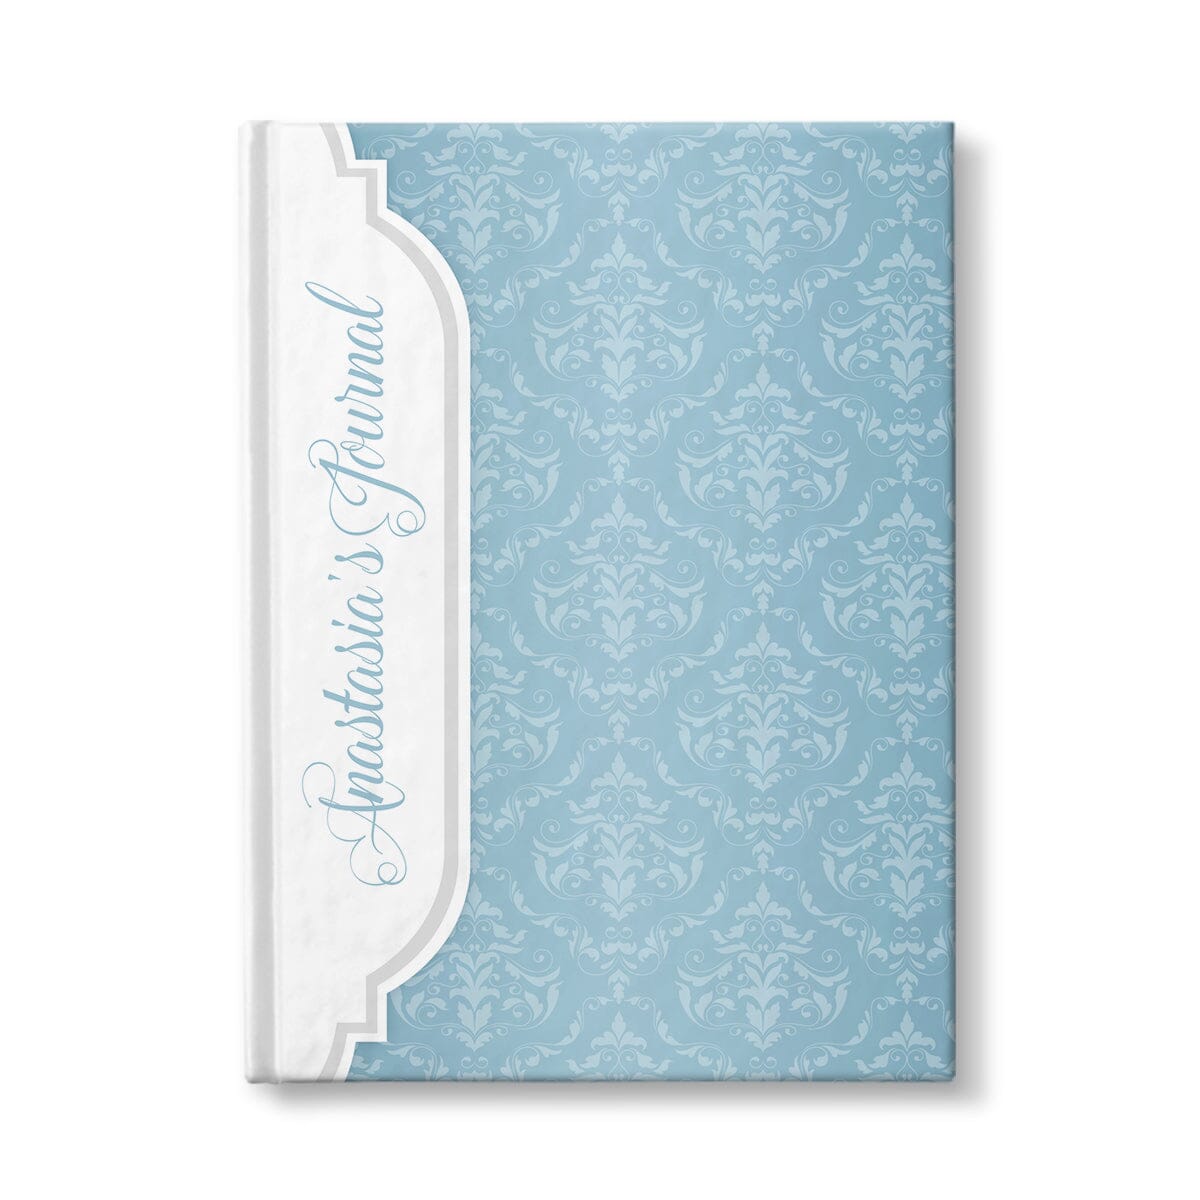 Personalized Blue Damask Journal at Artistically Invited.